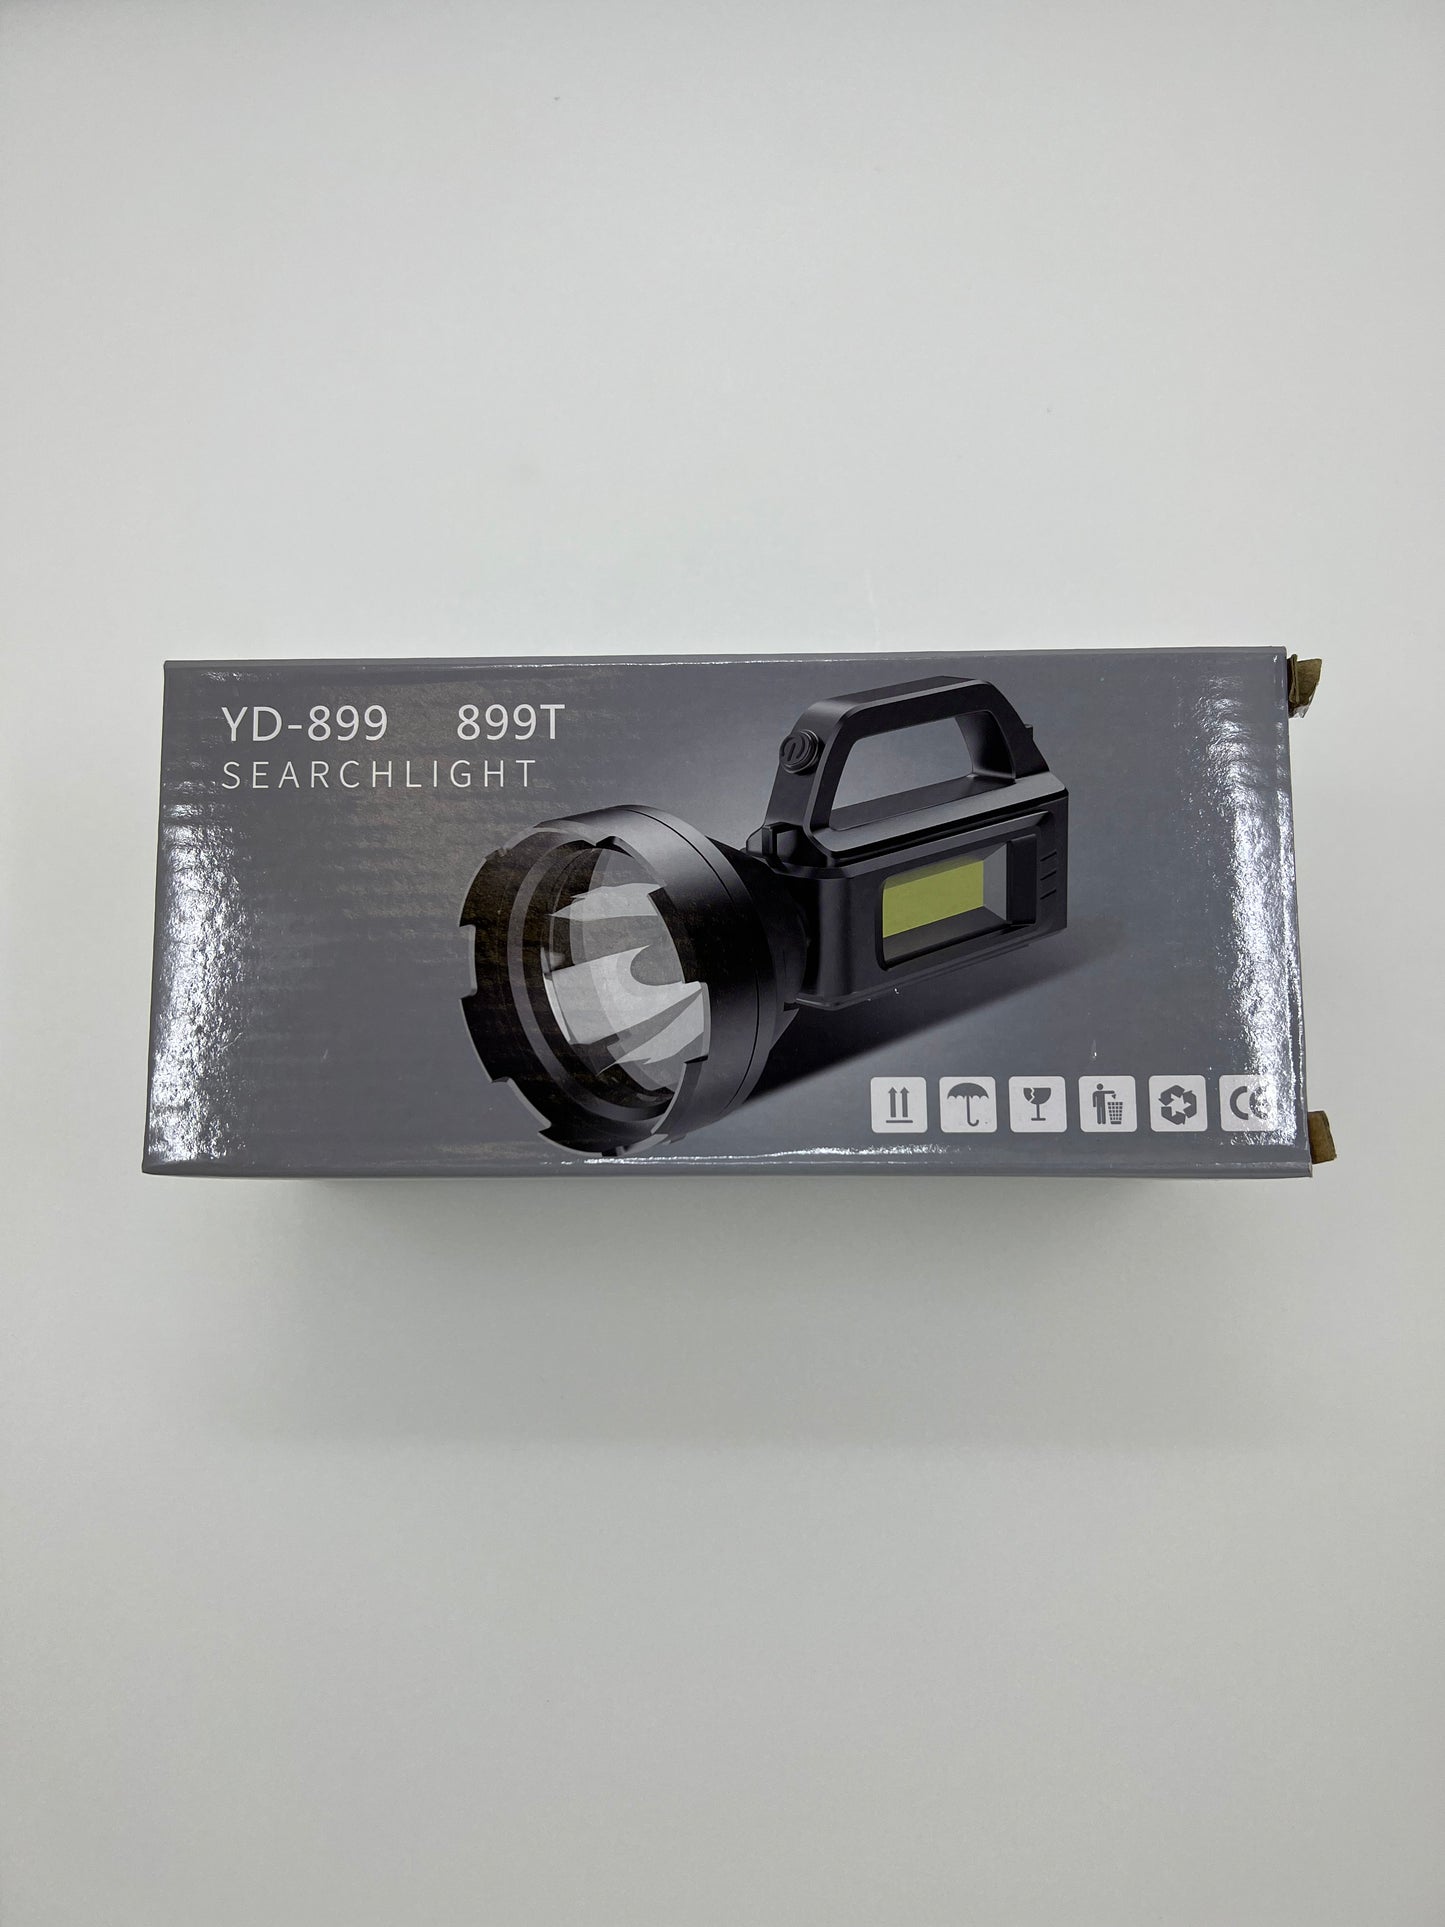 Large Rechargeable Flash Light